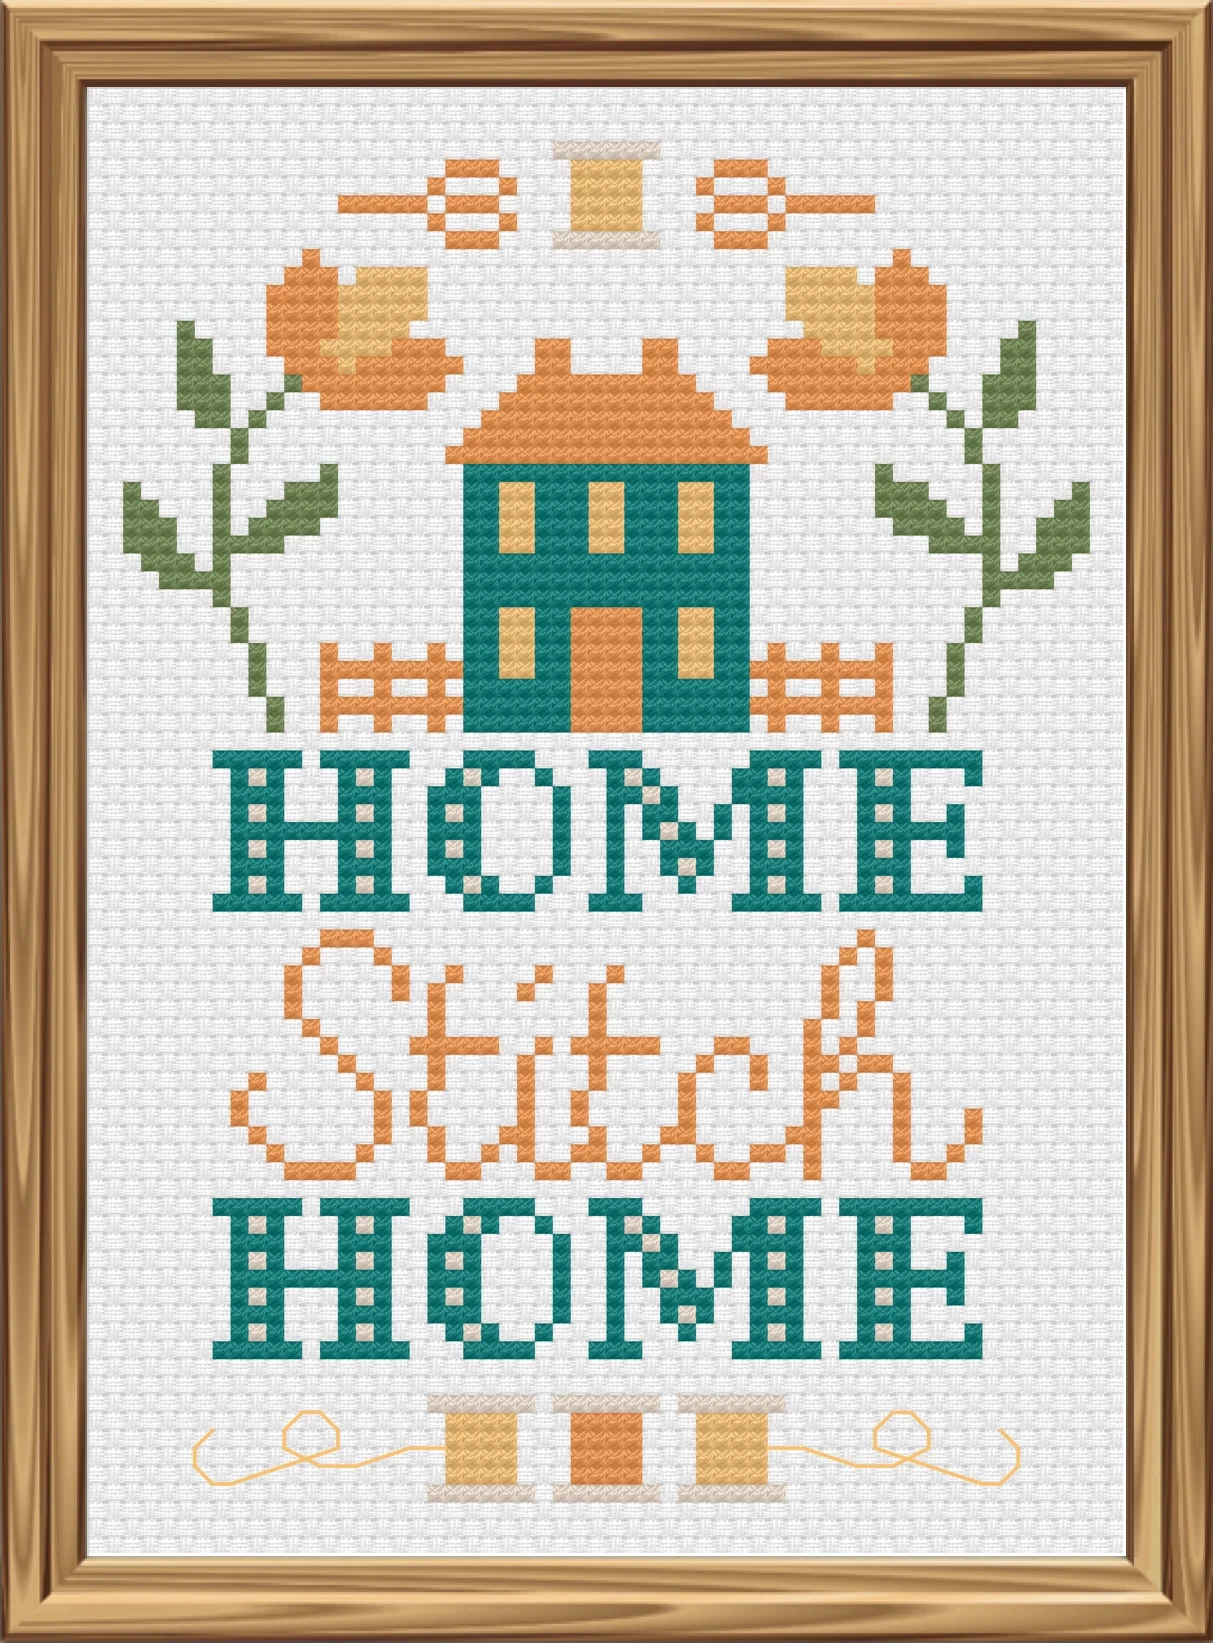  Image of Home Stitch Home by TinyModernist